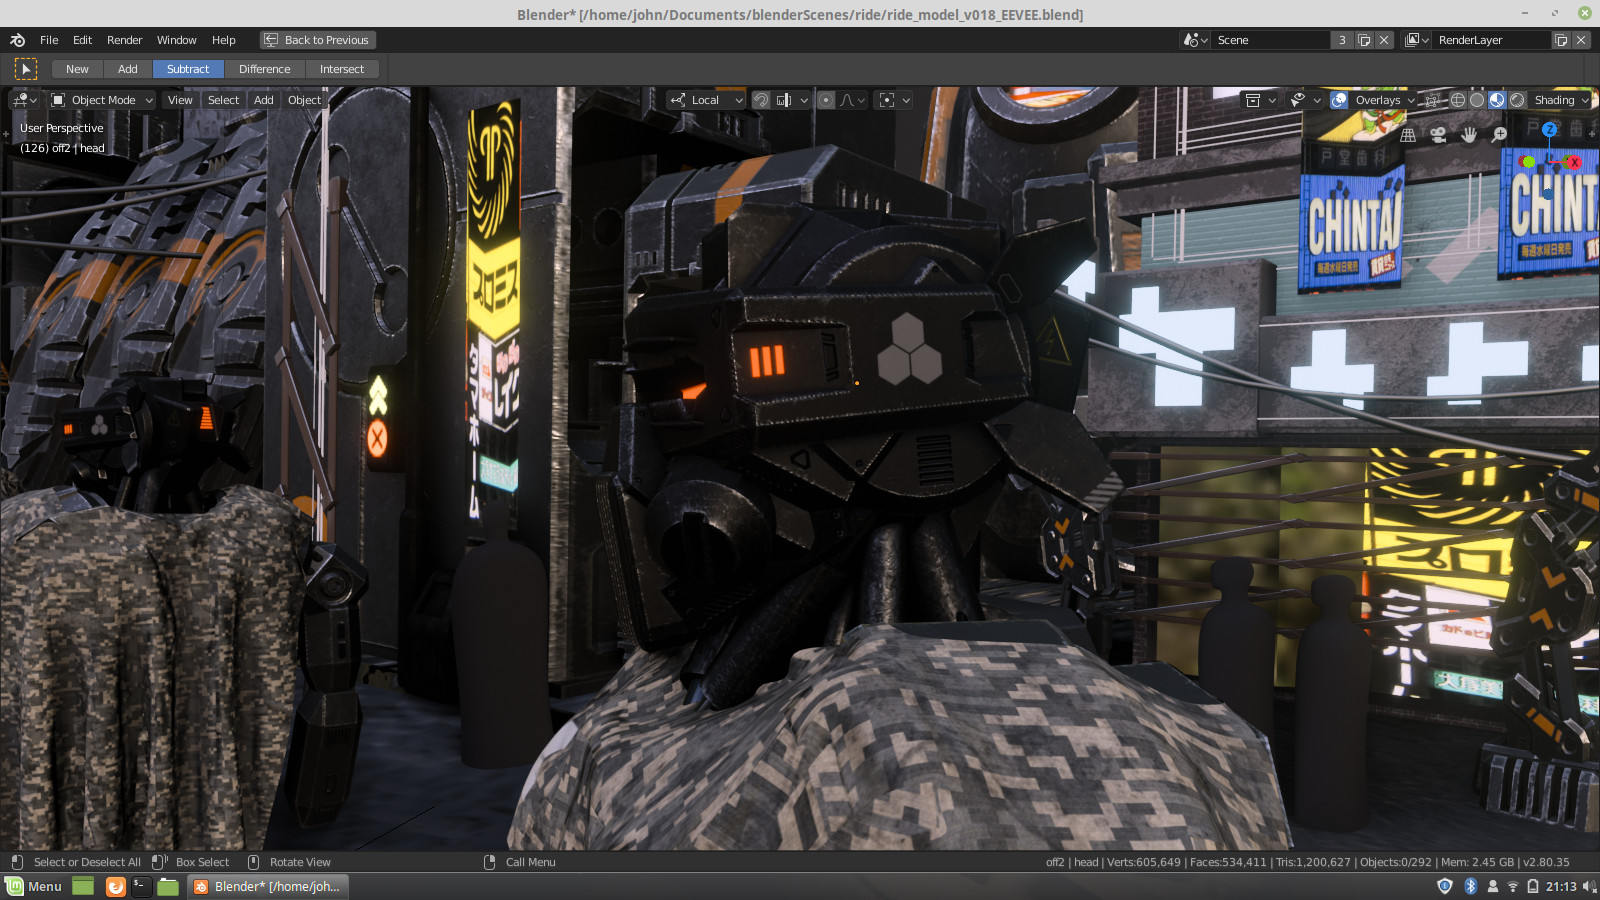 a few evee ldev renders of some bits and pieces in the scene, here's the robots head.